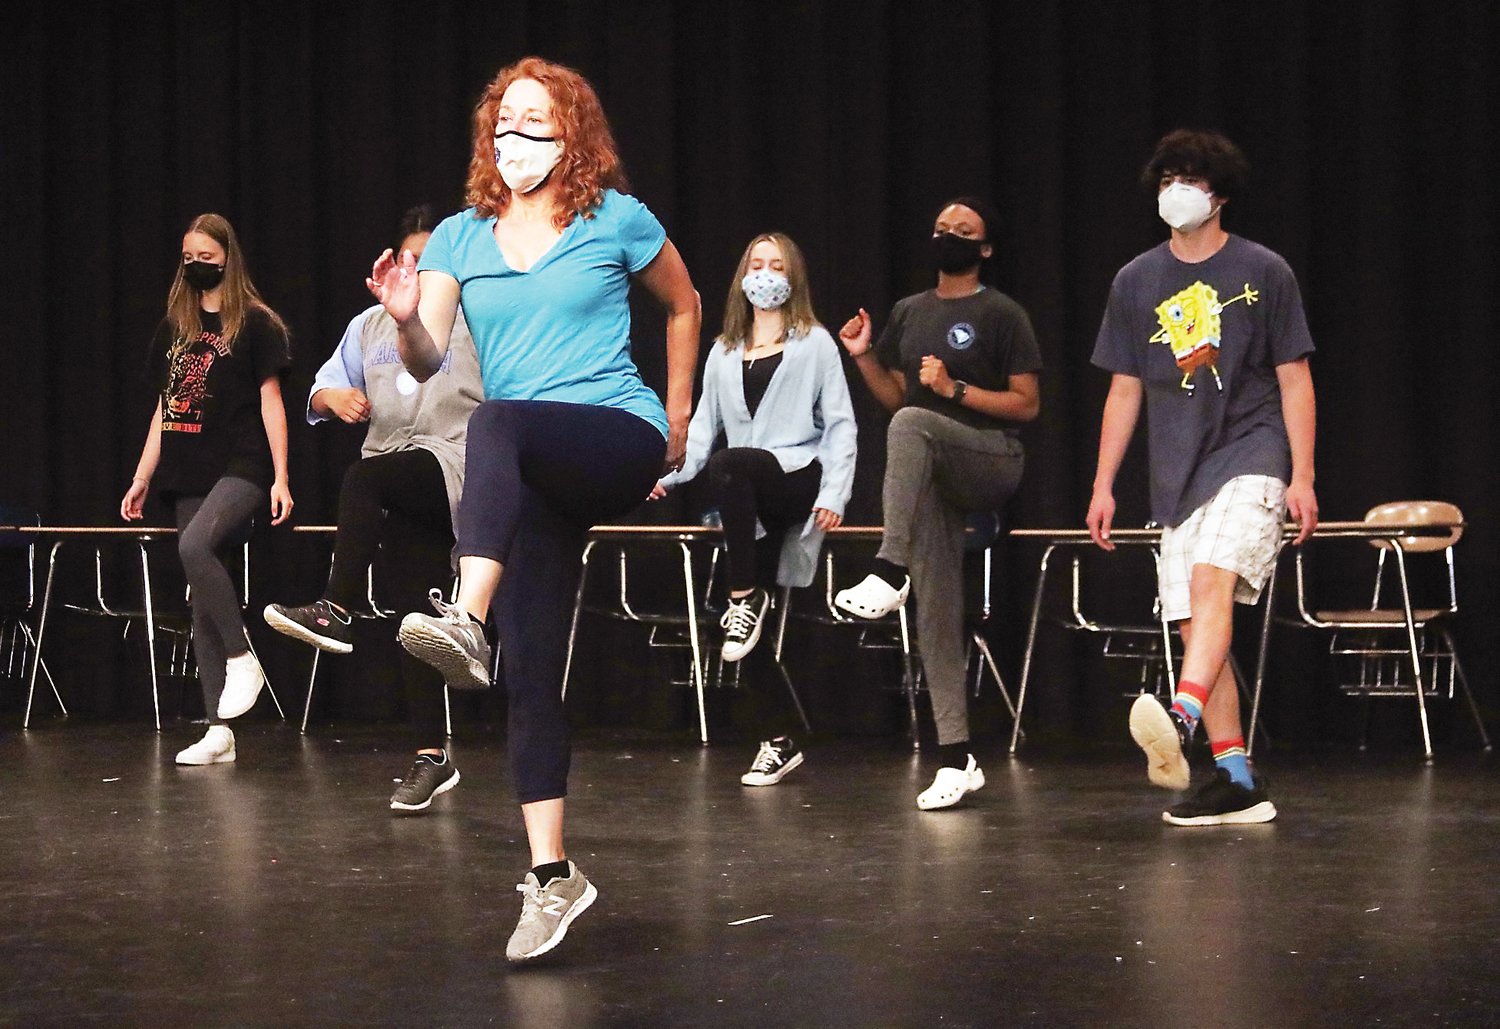 Peggy Taphorn, Producing Artistic Director for Temple Theatre in Sanford, teaches steps during the six-hour JMArts Theater Dance Workshop at Jordan-Matthews High School last summer.